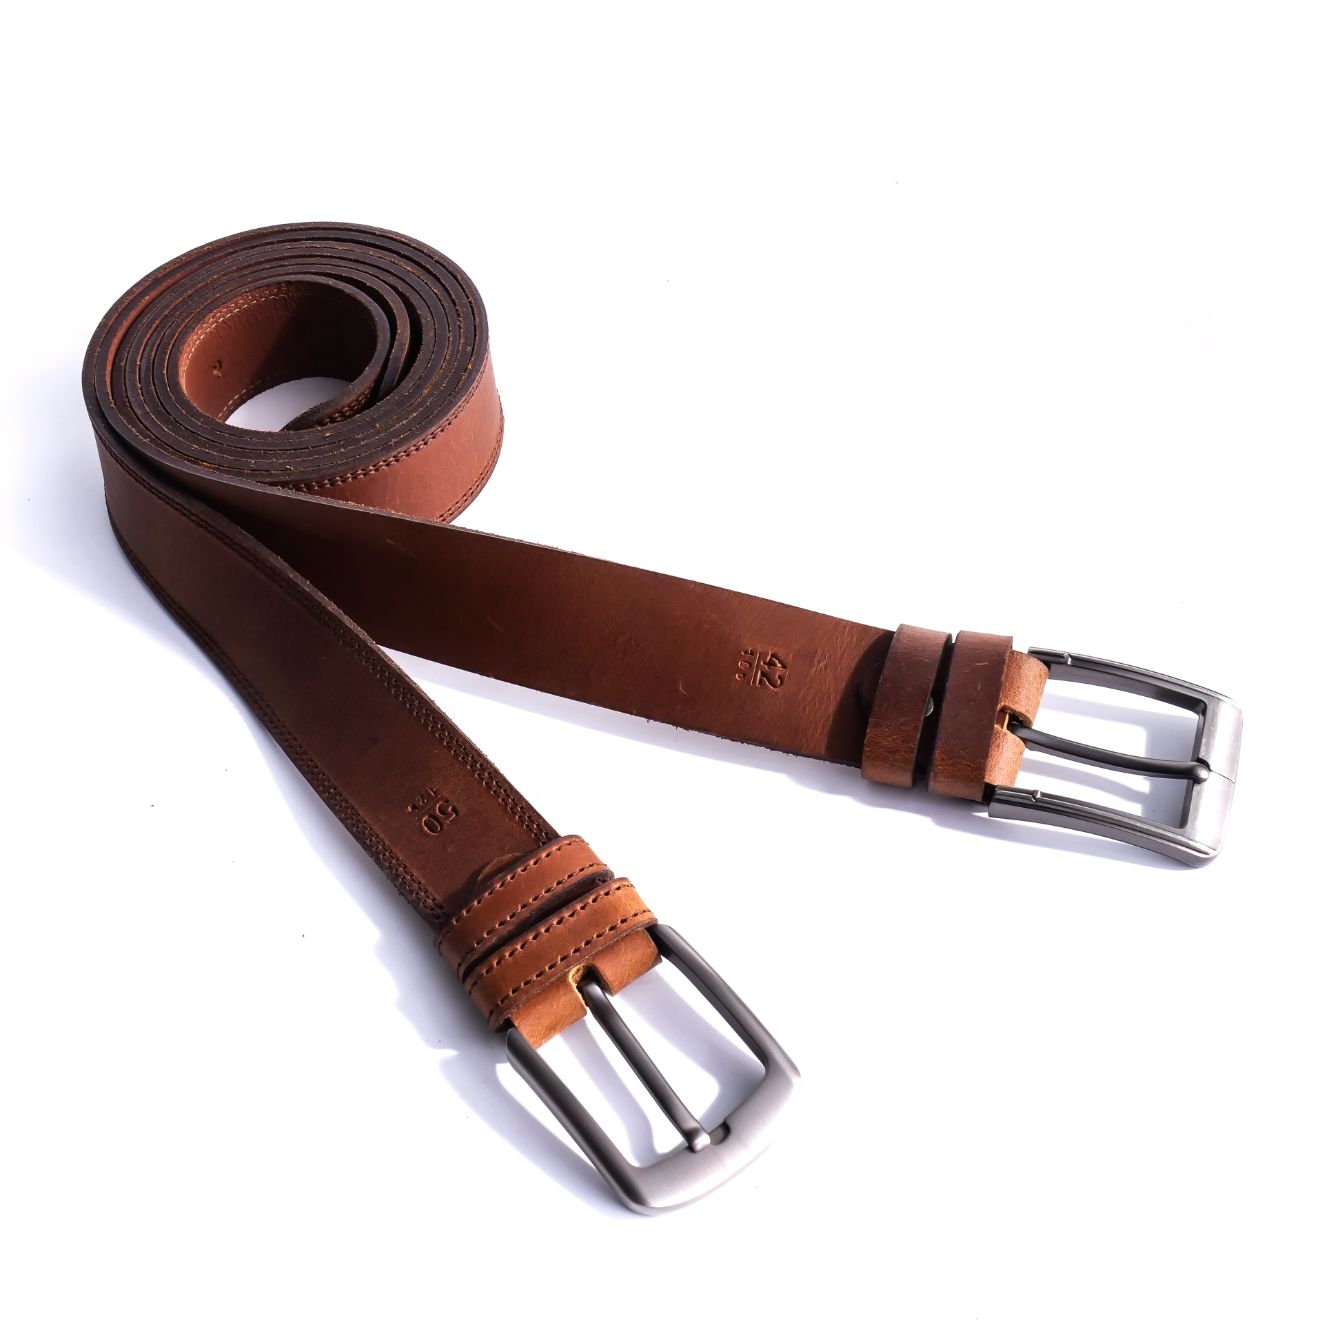 Rustic Leather Belt-Solid